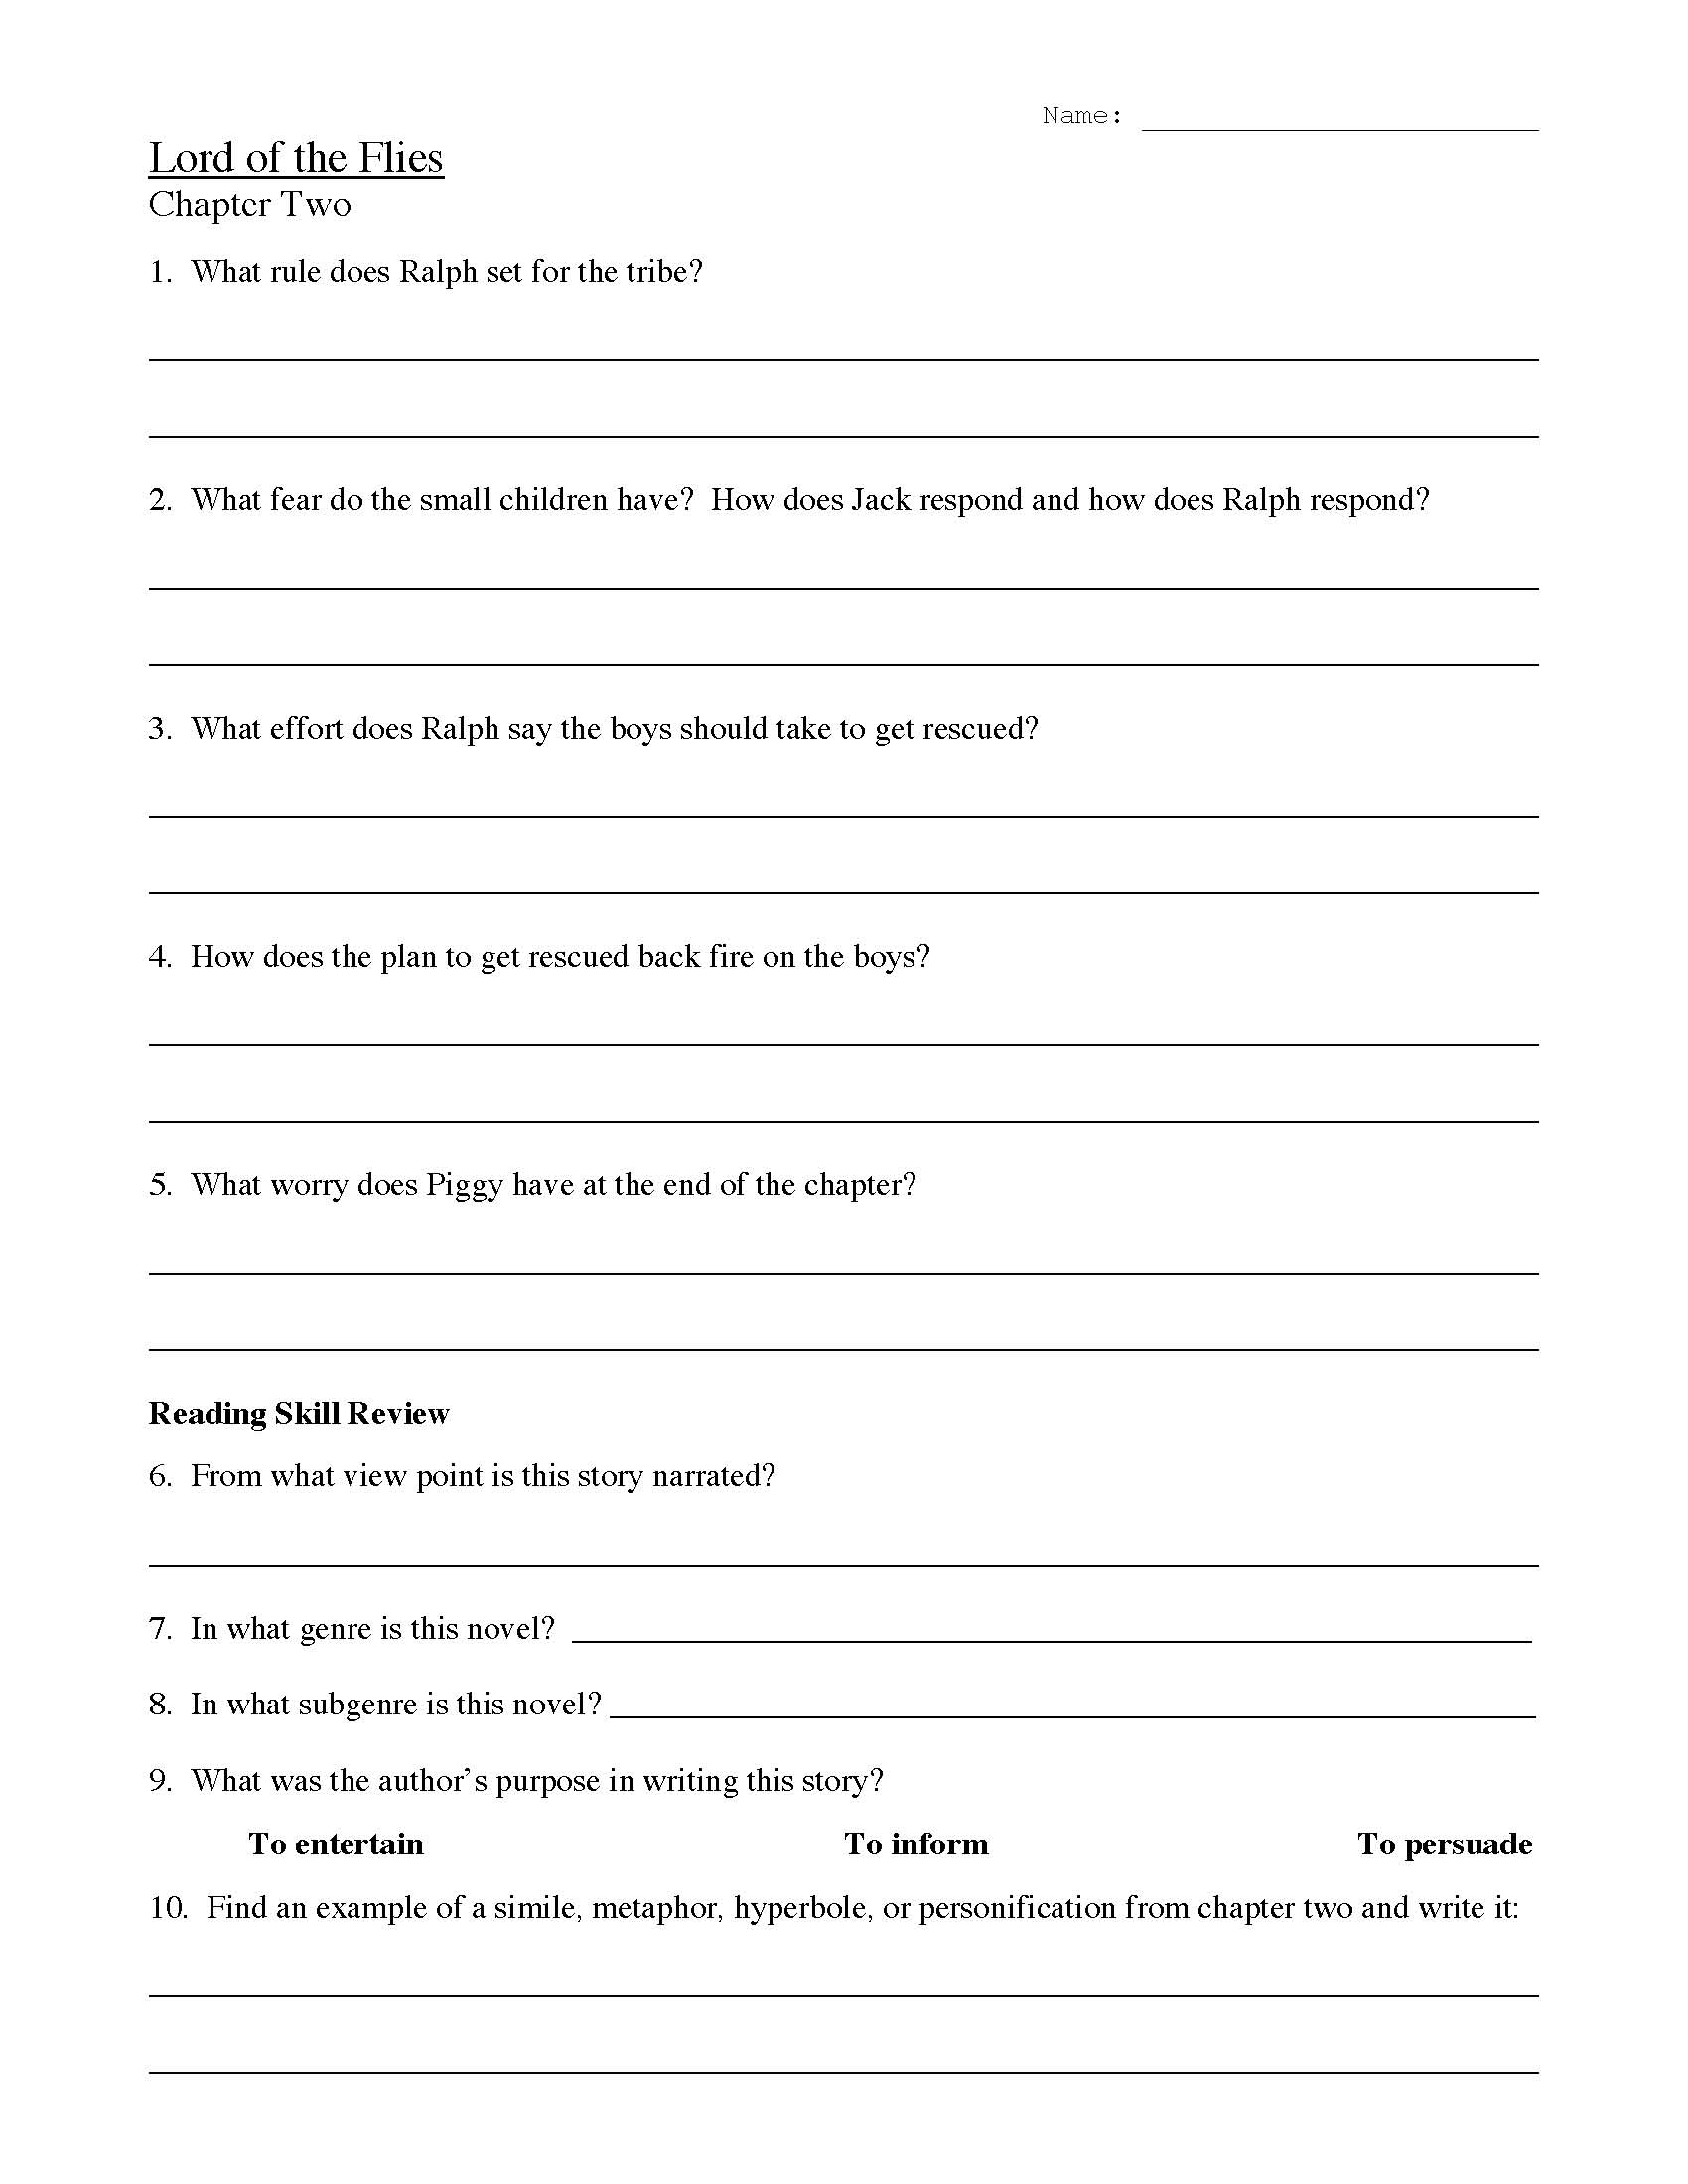 Lord of the Flies Chapter Two Worksheet Preview